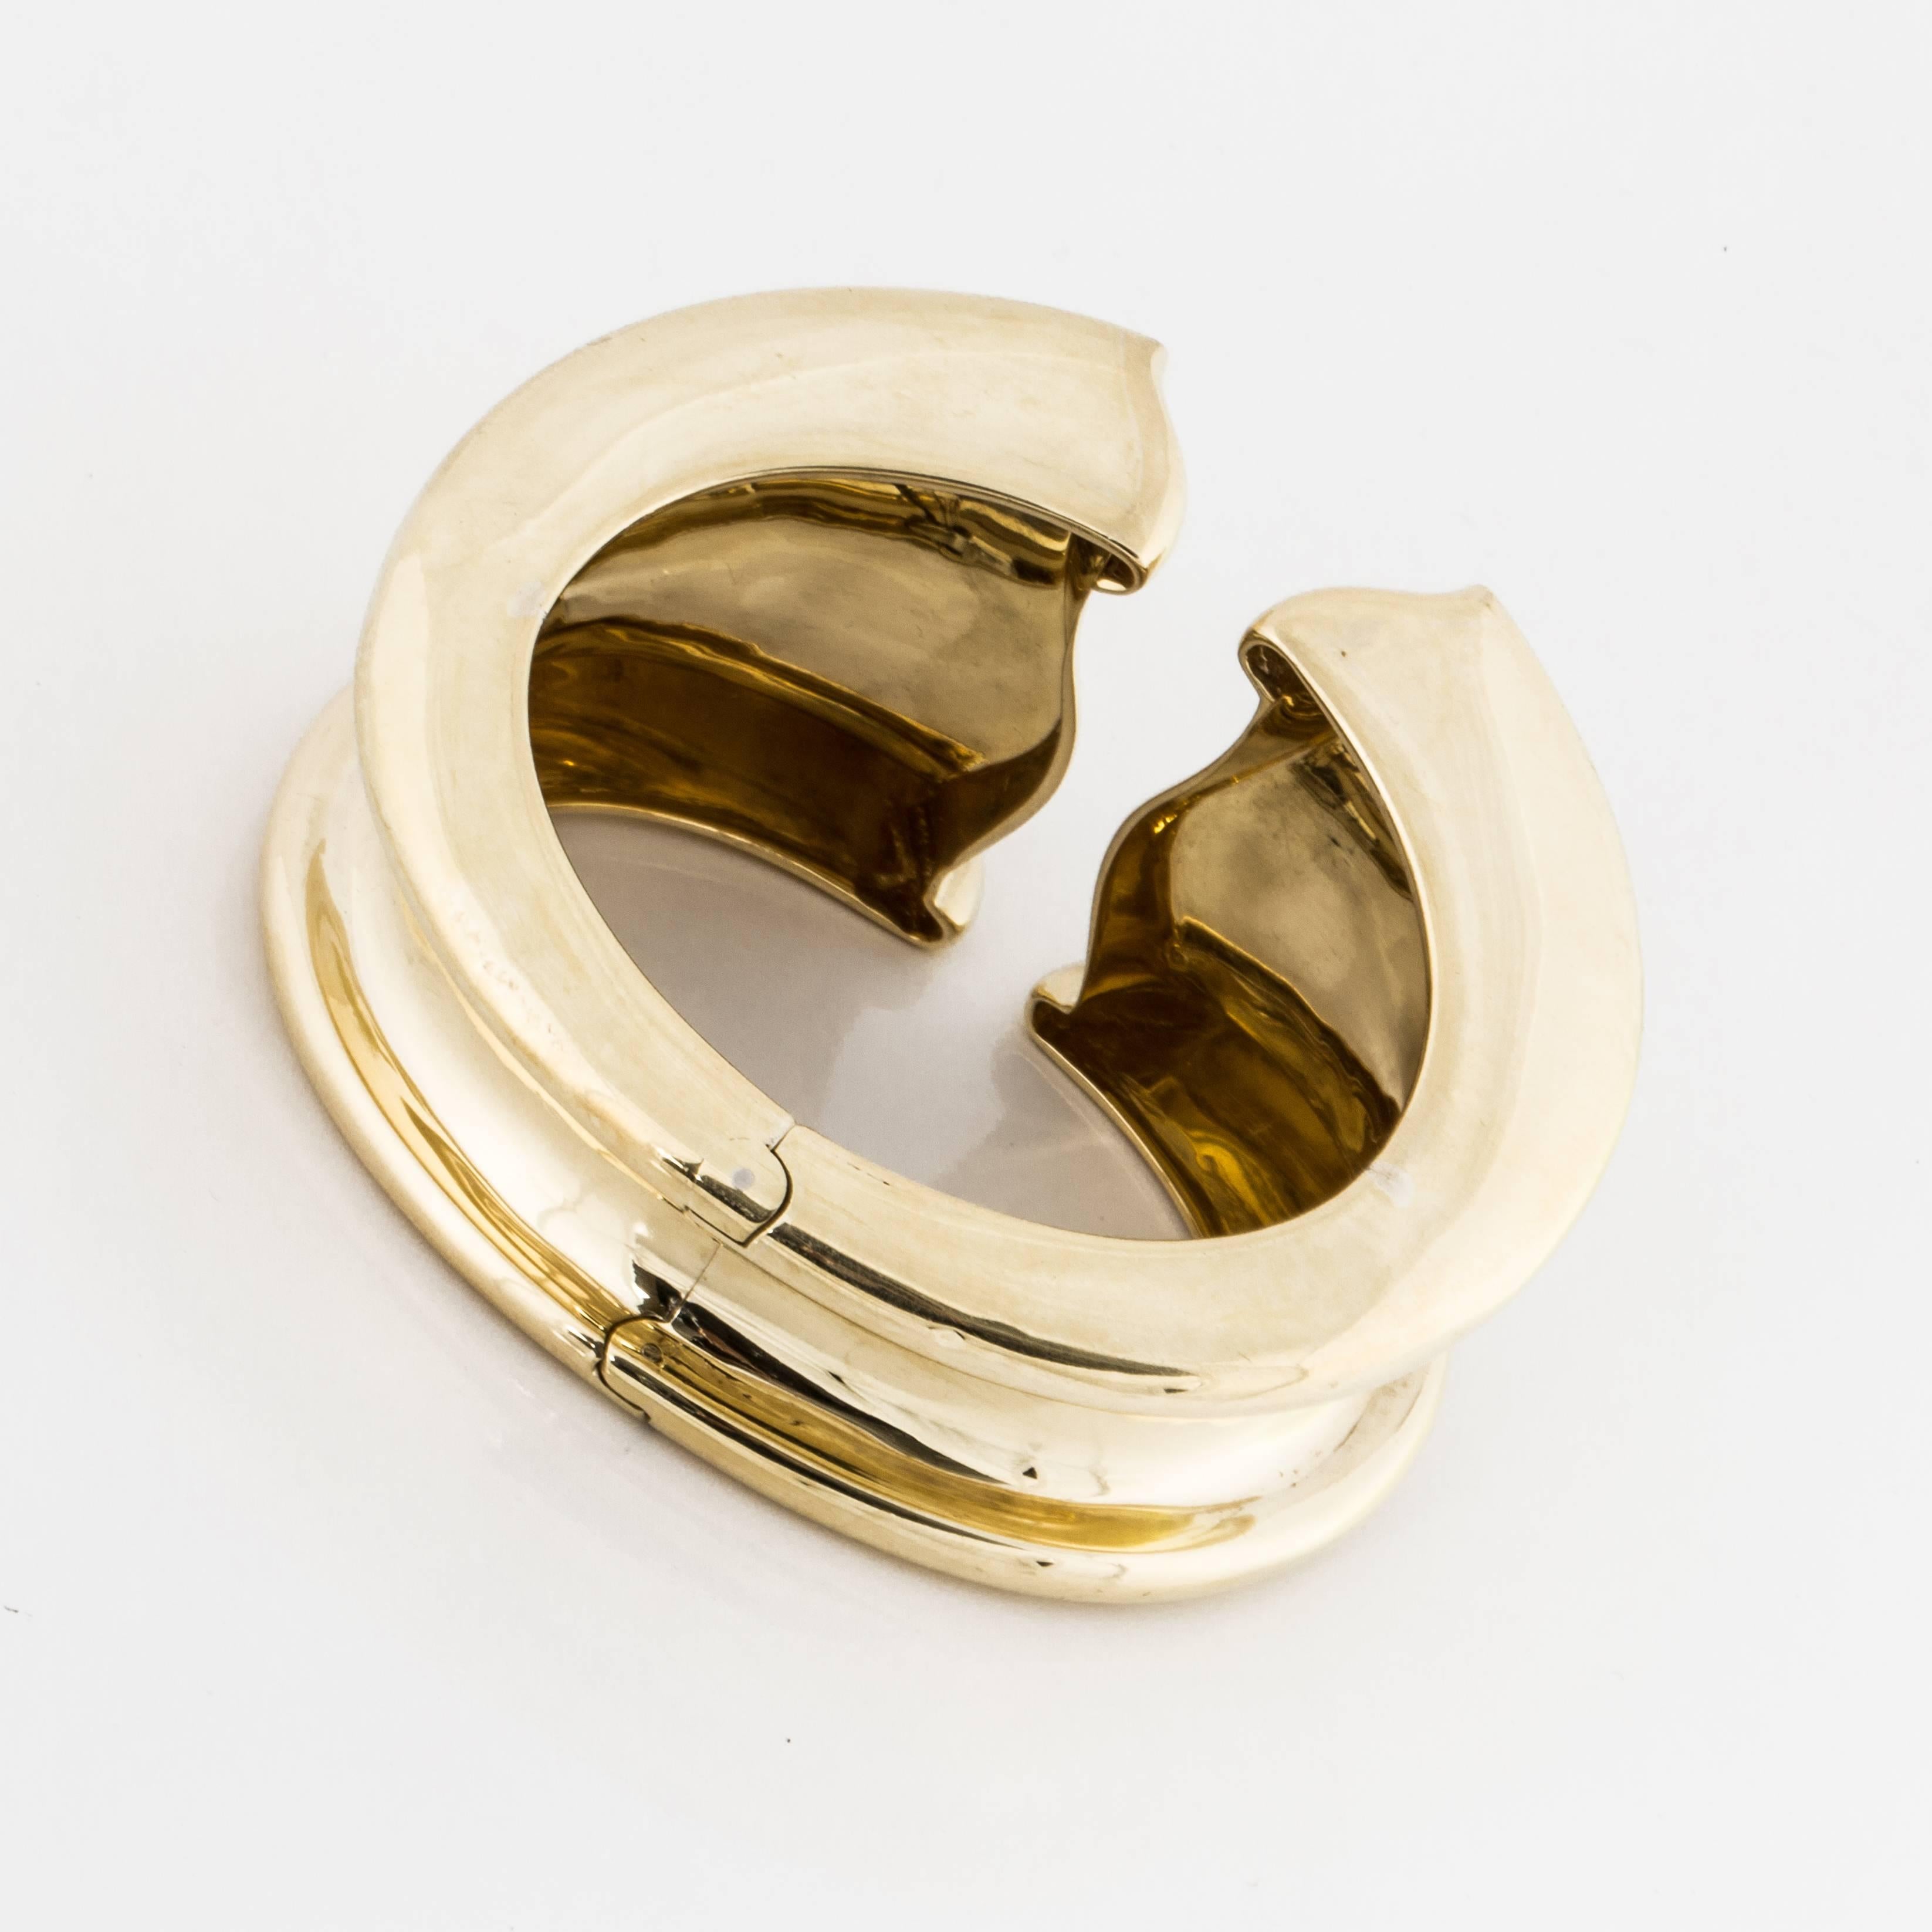 Hinged bangle in a free form and open design.  The top measures 1 7/8 inches at the widest point and 7/8 inches at the bottom (hinged area).  When the bangle is closed the opening measures 2 3/8 inches.  